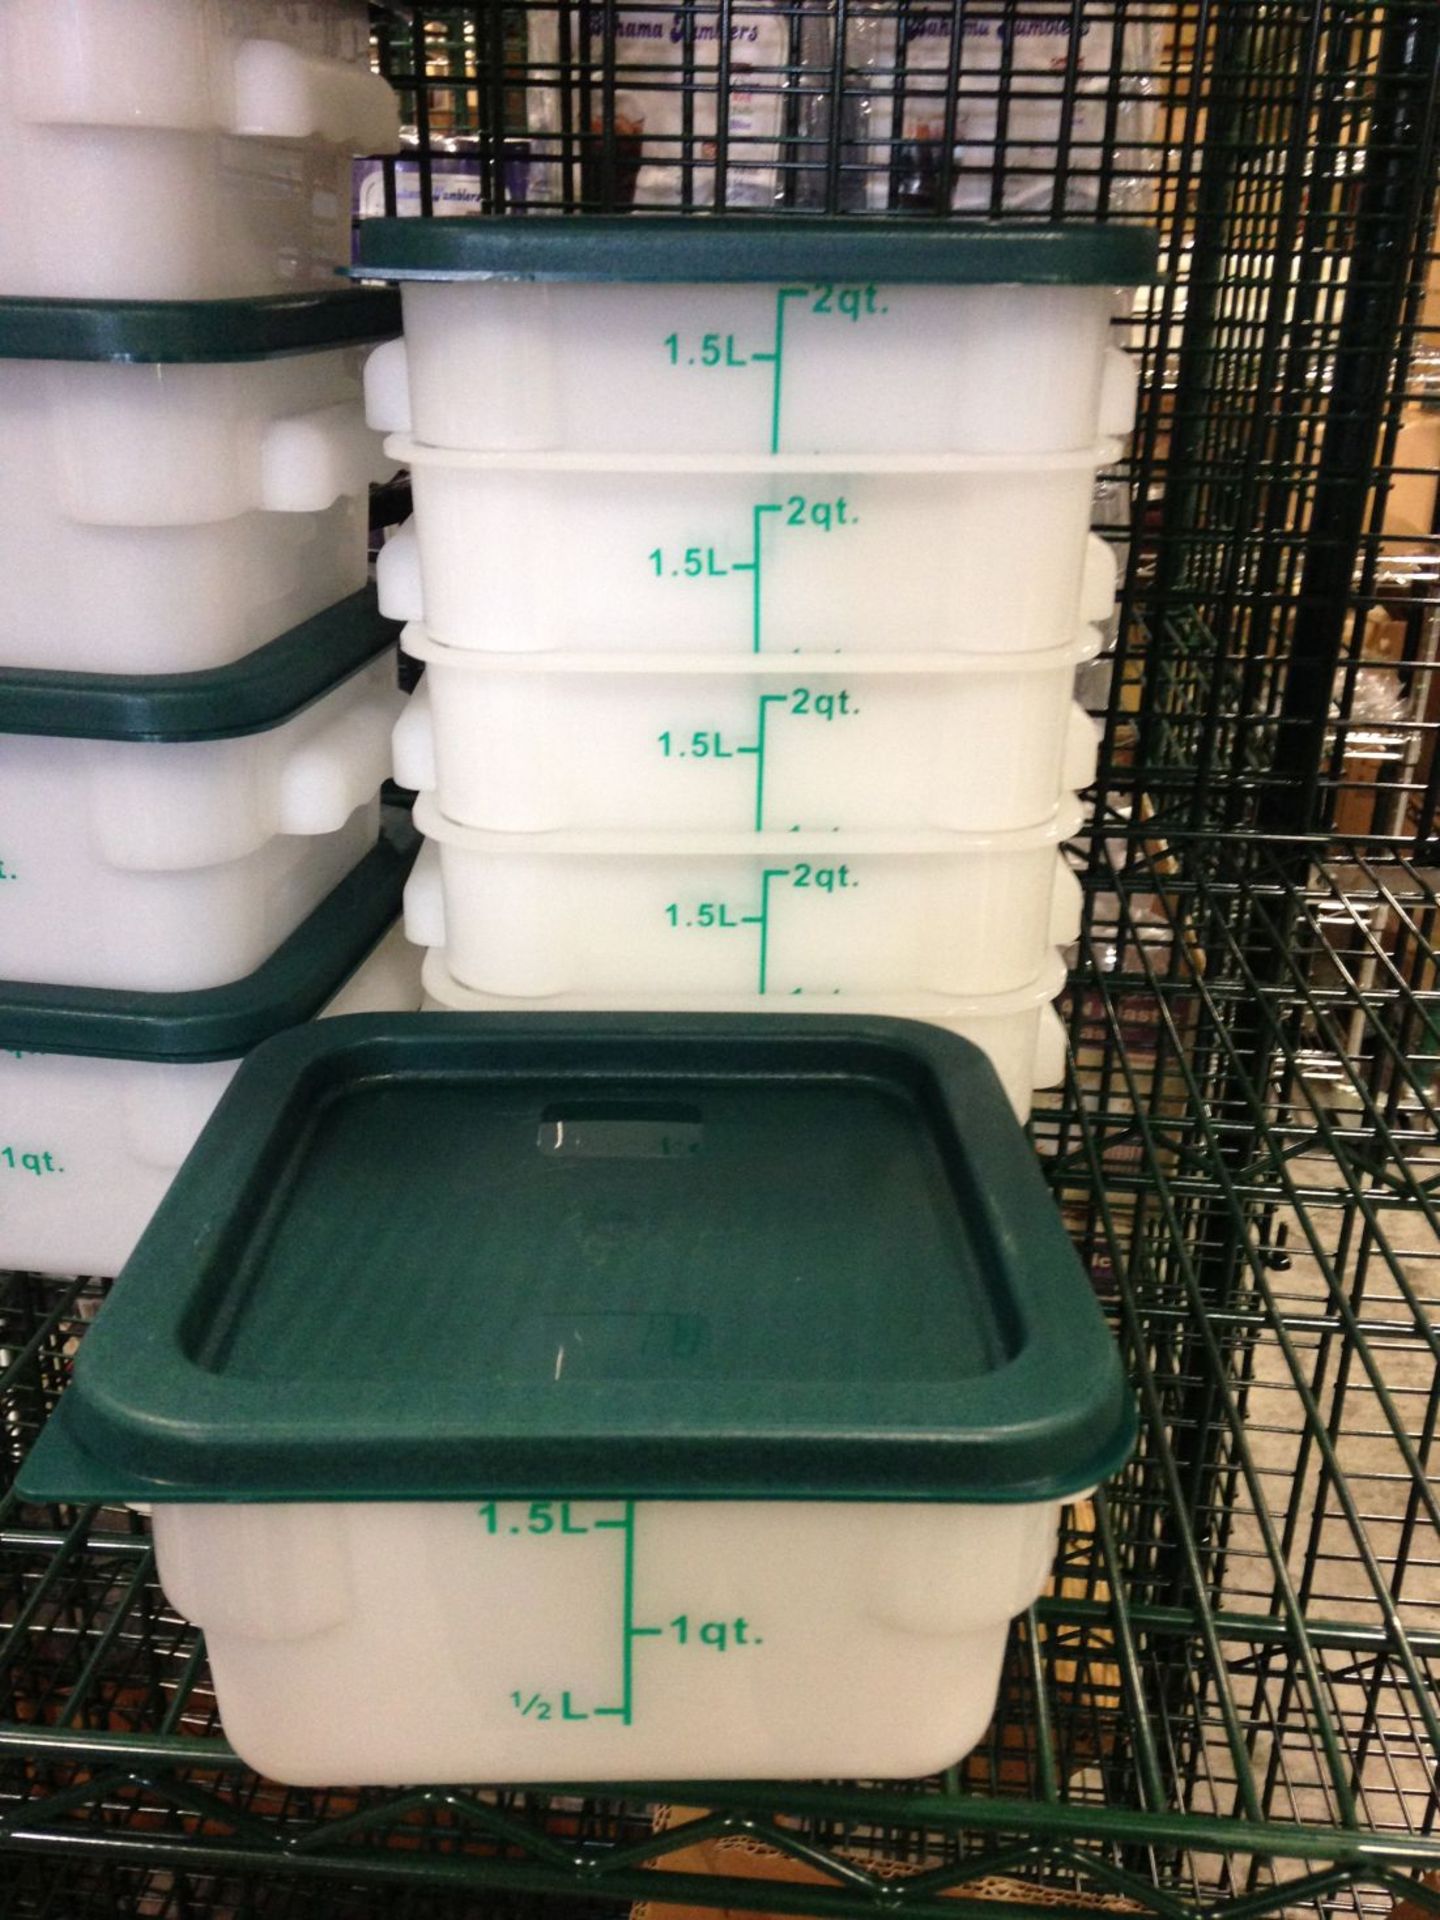 2qt White Food Storage Containers with Lids - Lot of 6